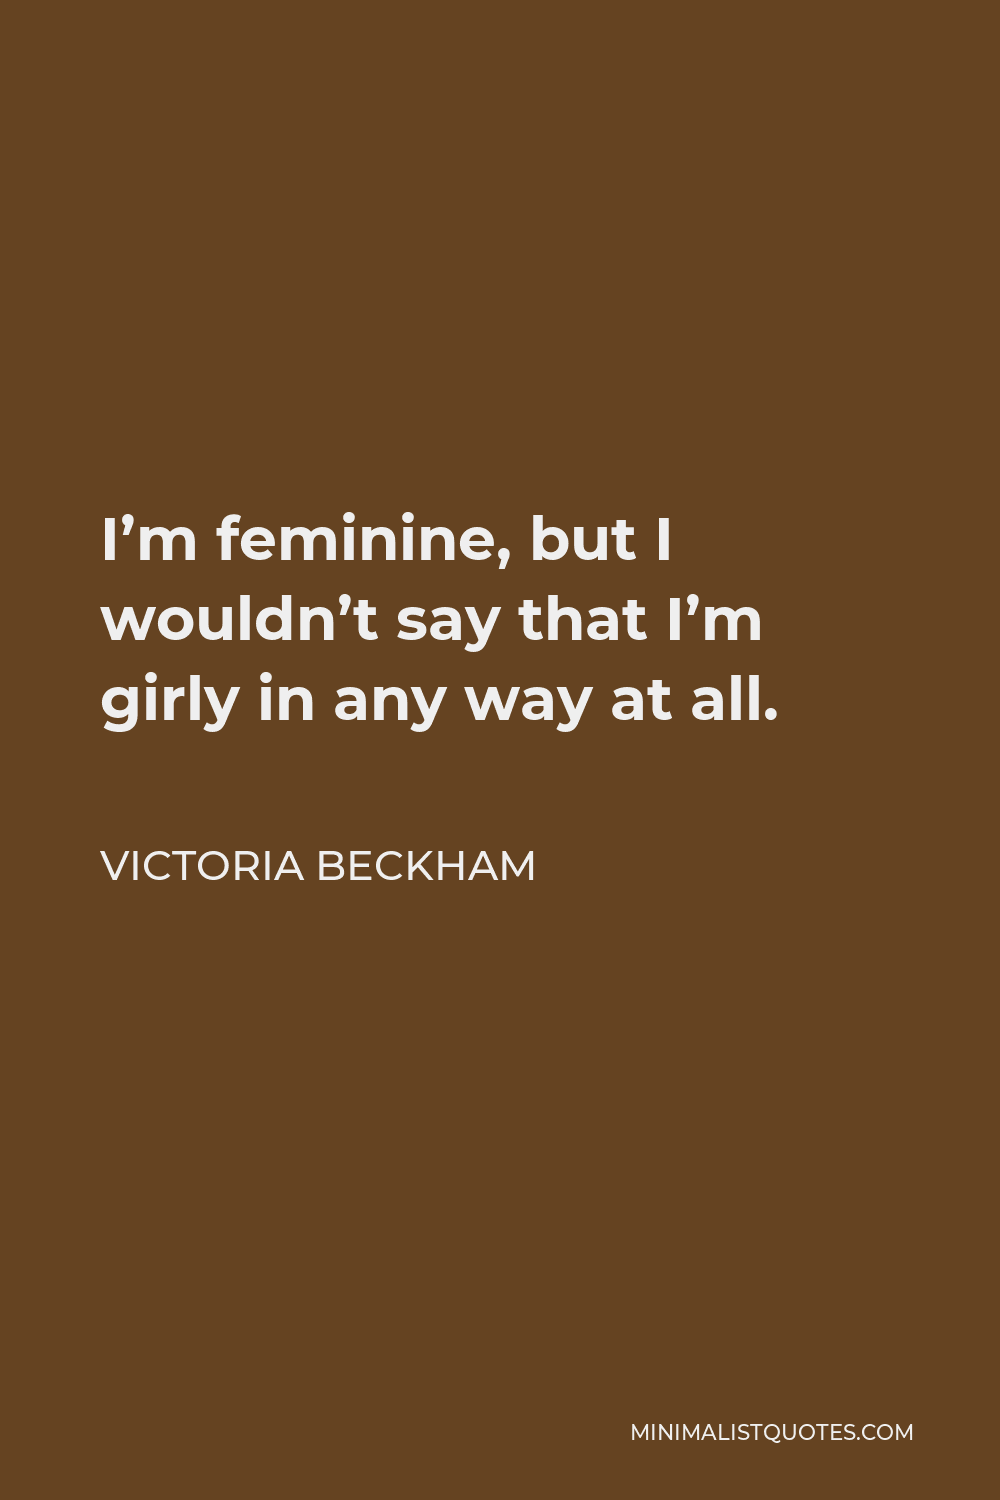 Victoria Beckham Quote - I’m feminine, but I wouldn’t say that I’m girly in any way at all.